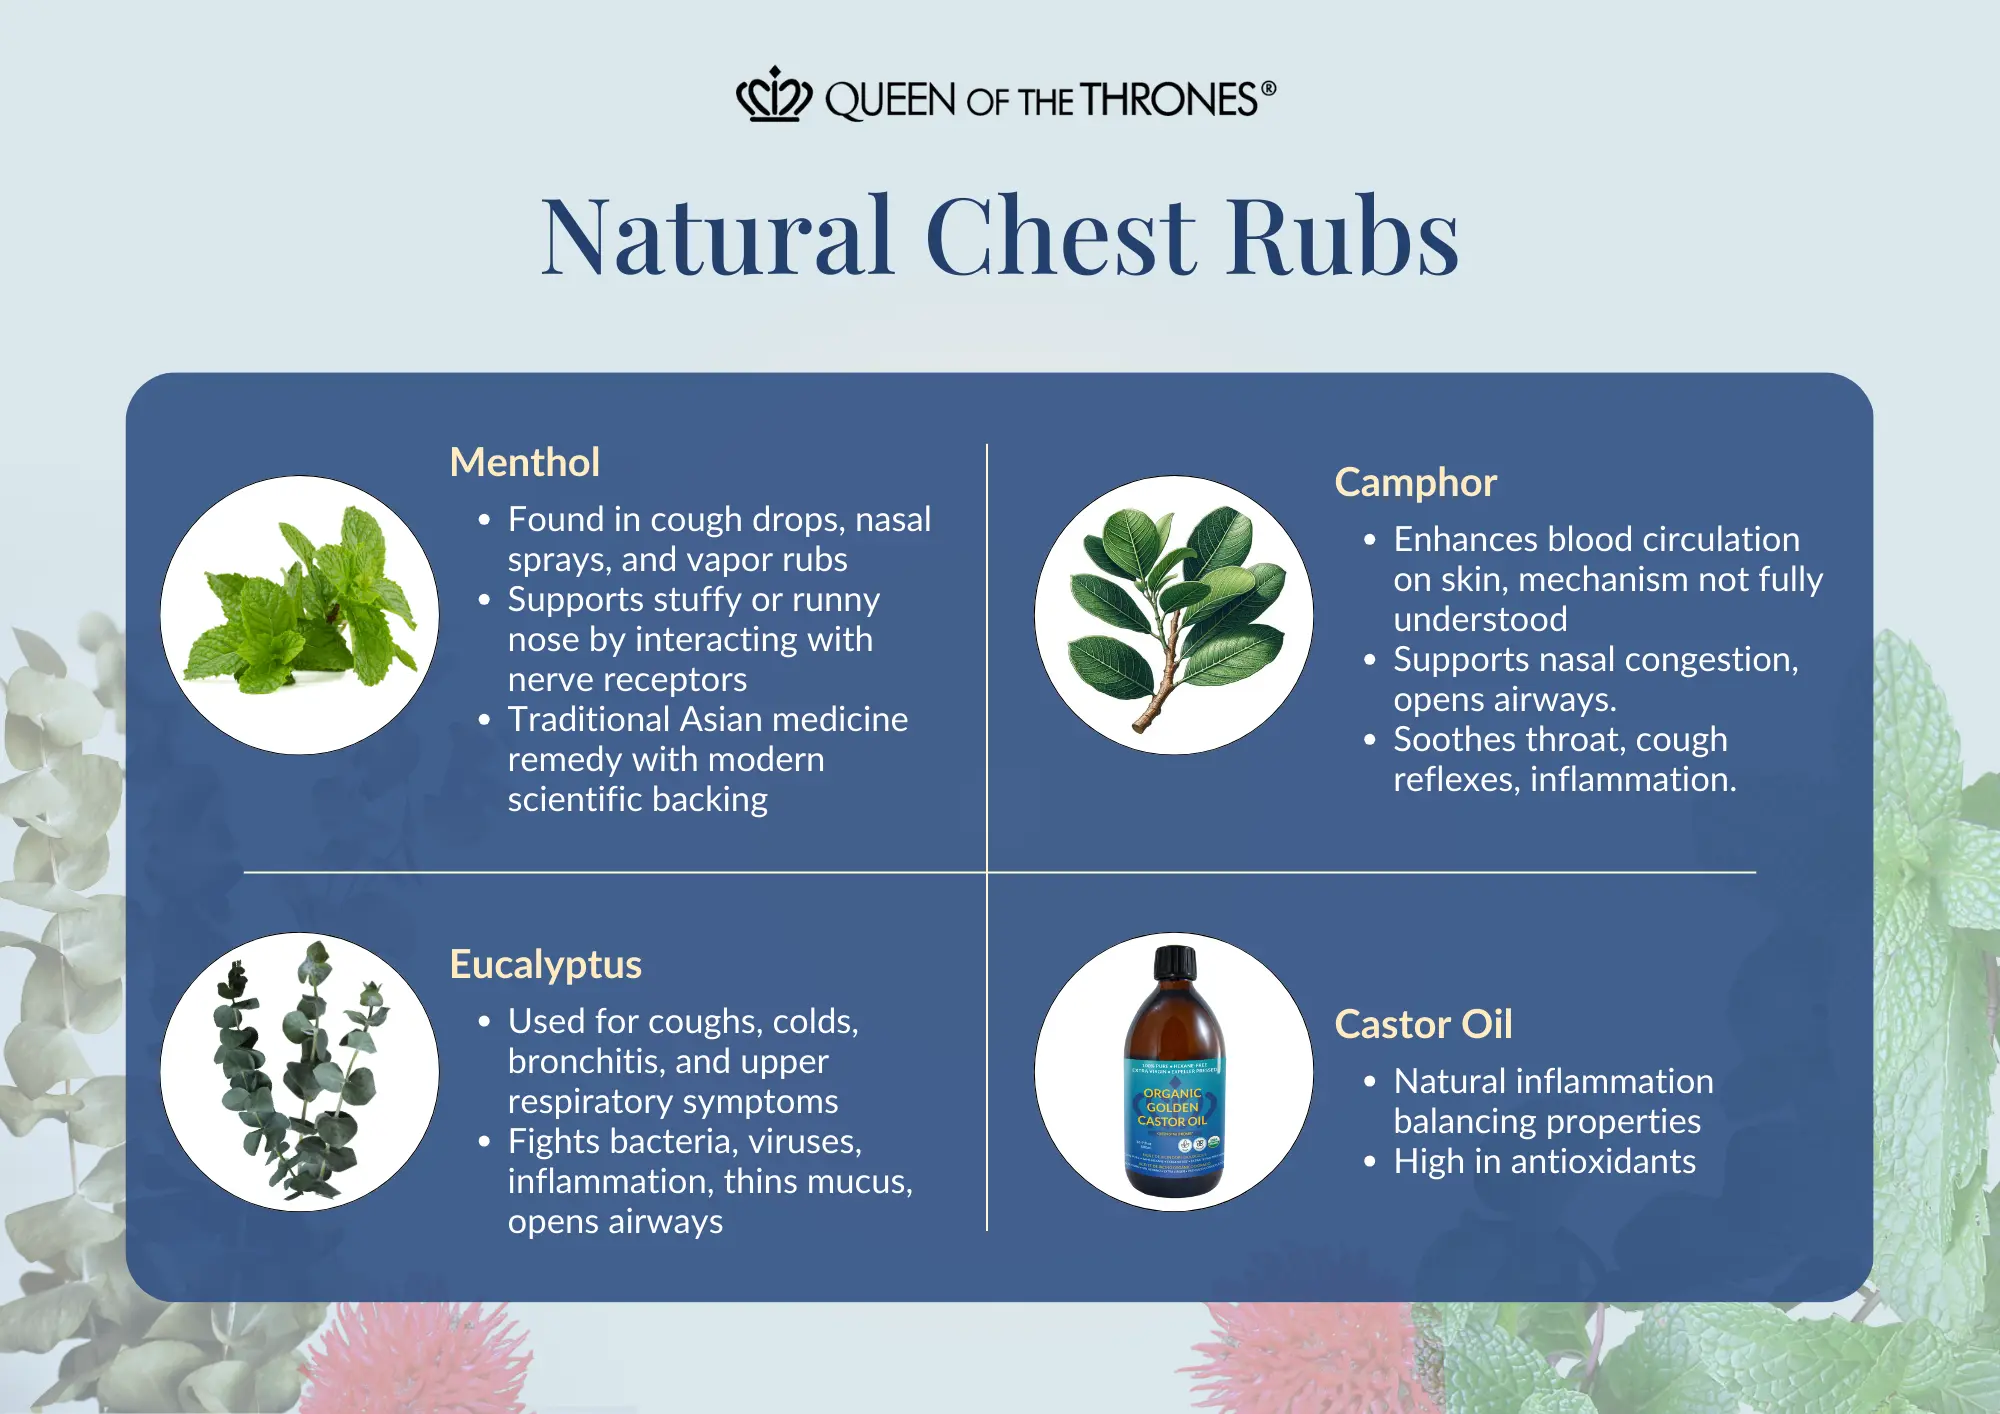 Natural chest rubs by Queen of the Thrones